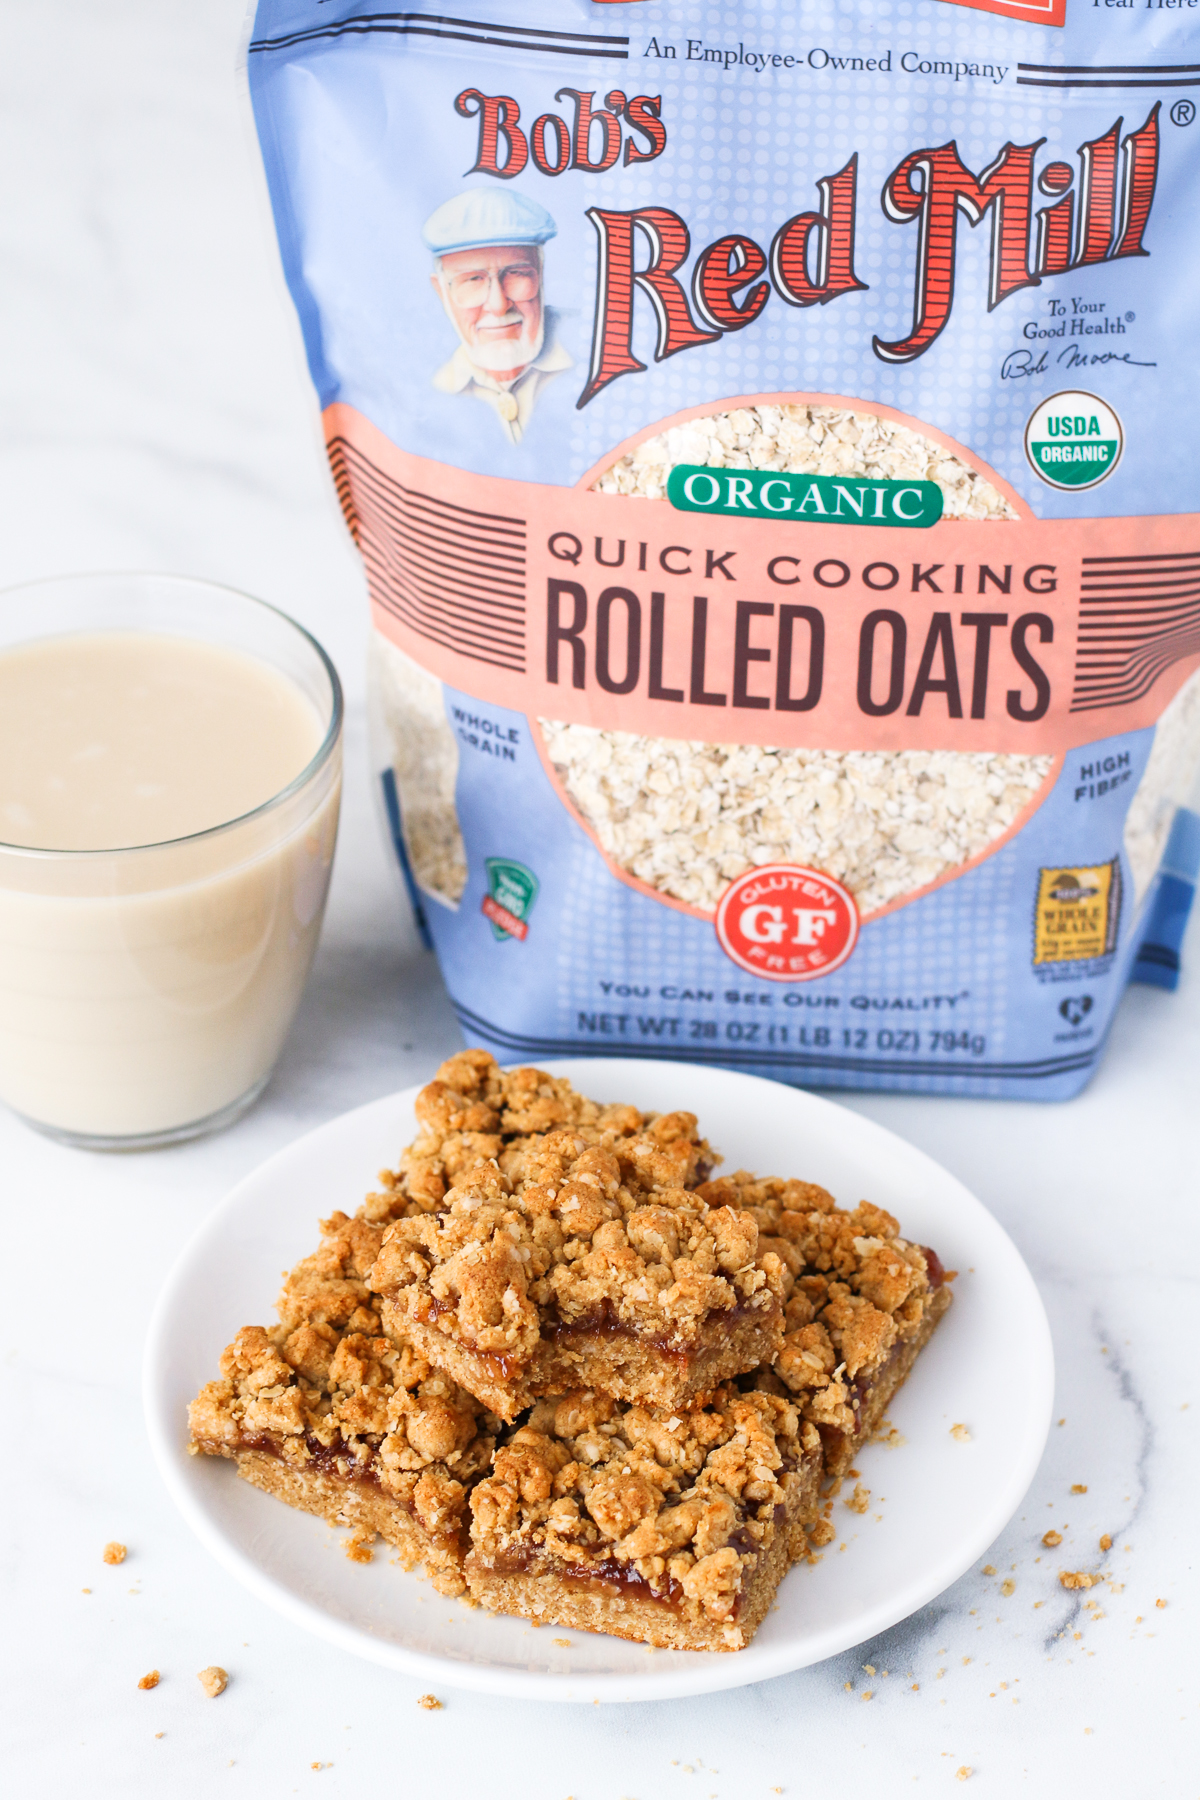 Gluten Free Vegan Peanut Butter and Jelly Oat Bars. The classic combination of creamy peanut butter and strawberry jelly in a oat crumb bar, featuring Bob’s Red Mill gluten free oats.